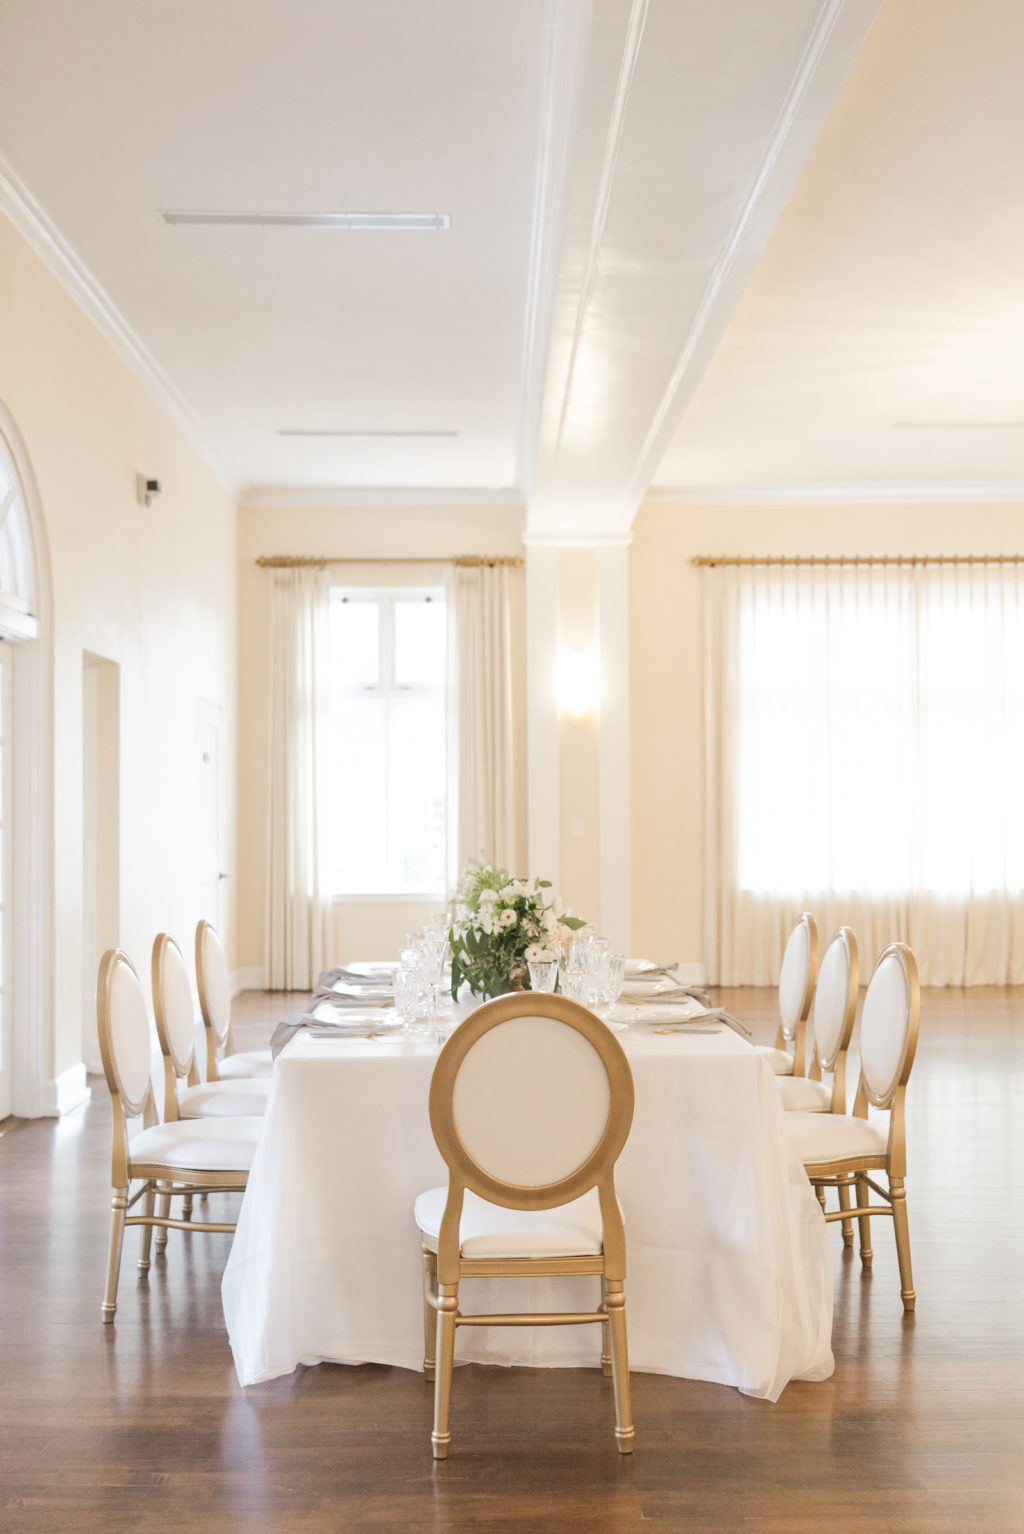 Southern Charm classic and traditional wedding reception decor, long table with white tablecloth, Louis XVI Chair and lush white floral centerpiece | Tampa Bay wedding planner and design Elegant Affairs by Design | Kate Ryan Event Rentals